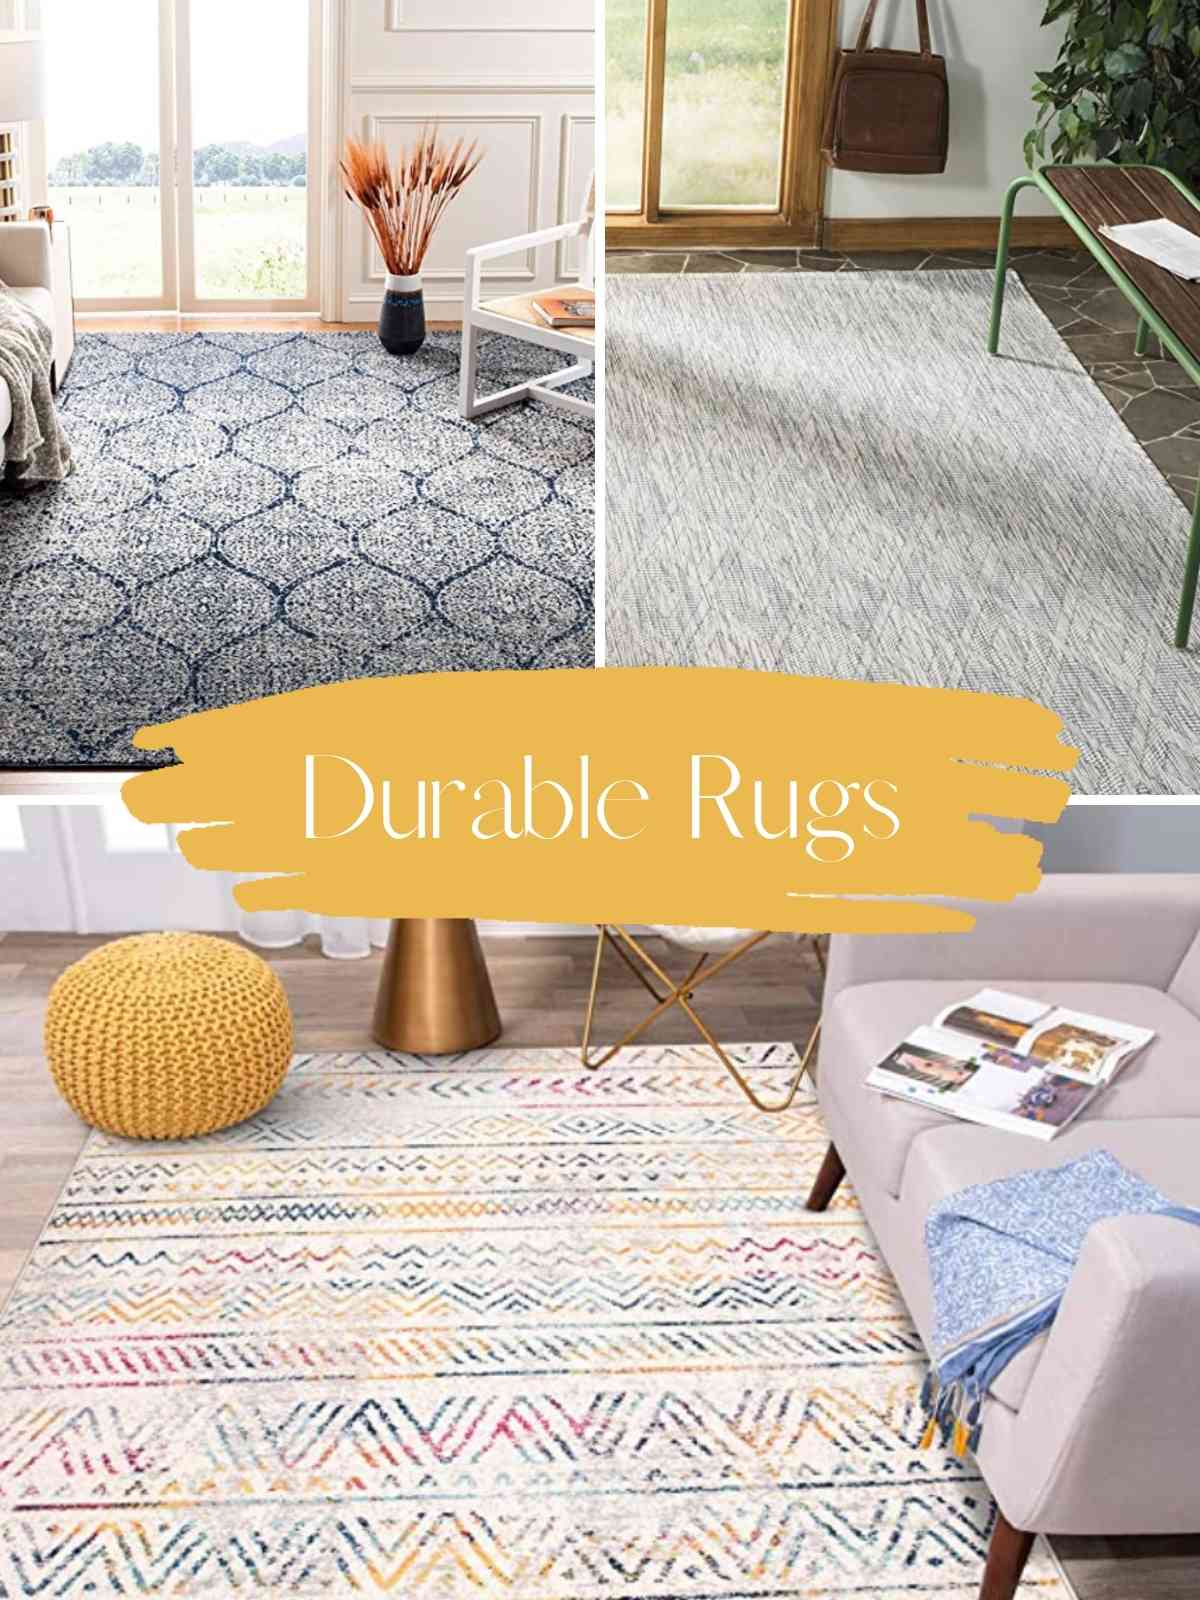 Durable Rugs For lower level